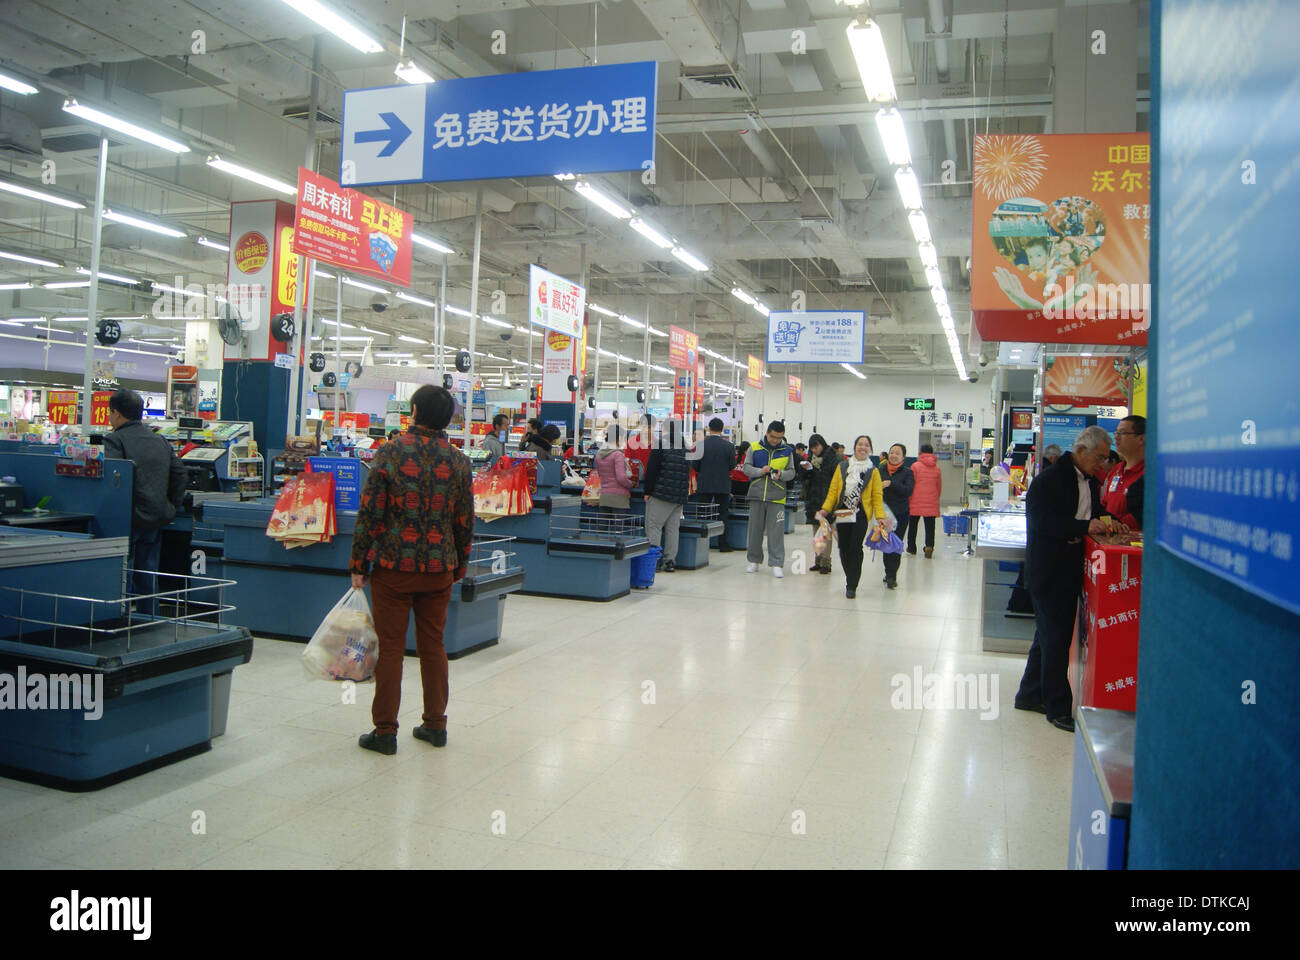 Wal-mart in China. People in the shopping. Stock Photo